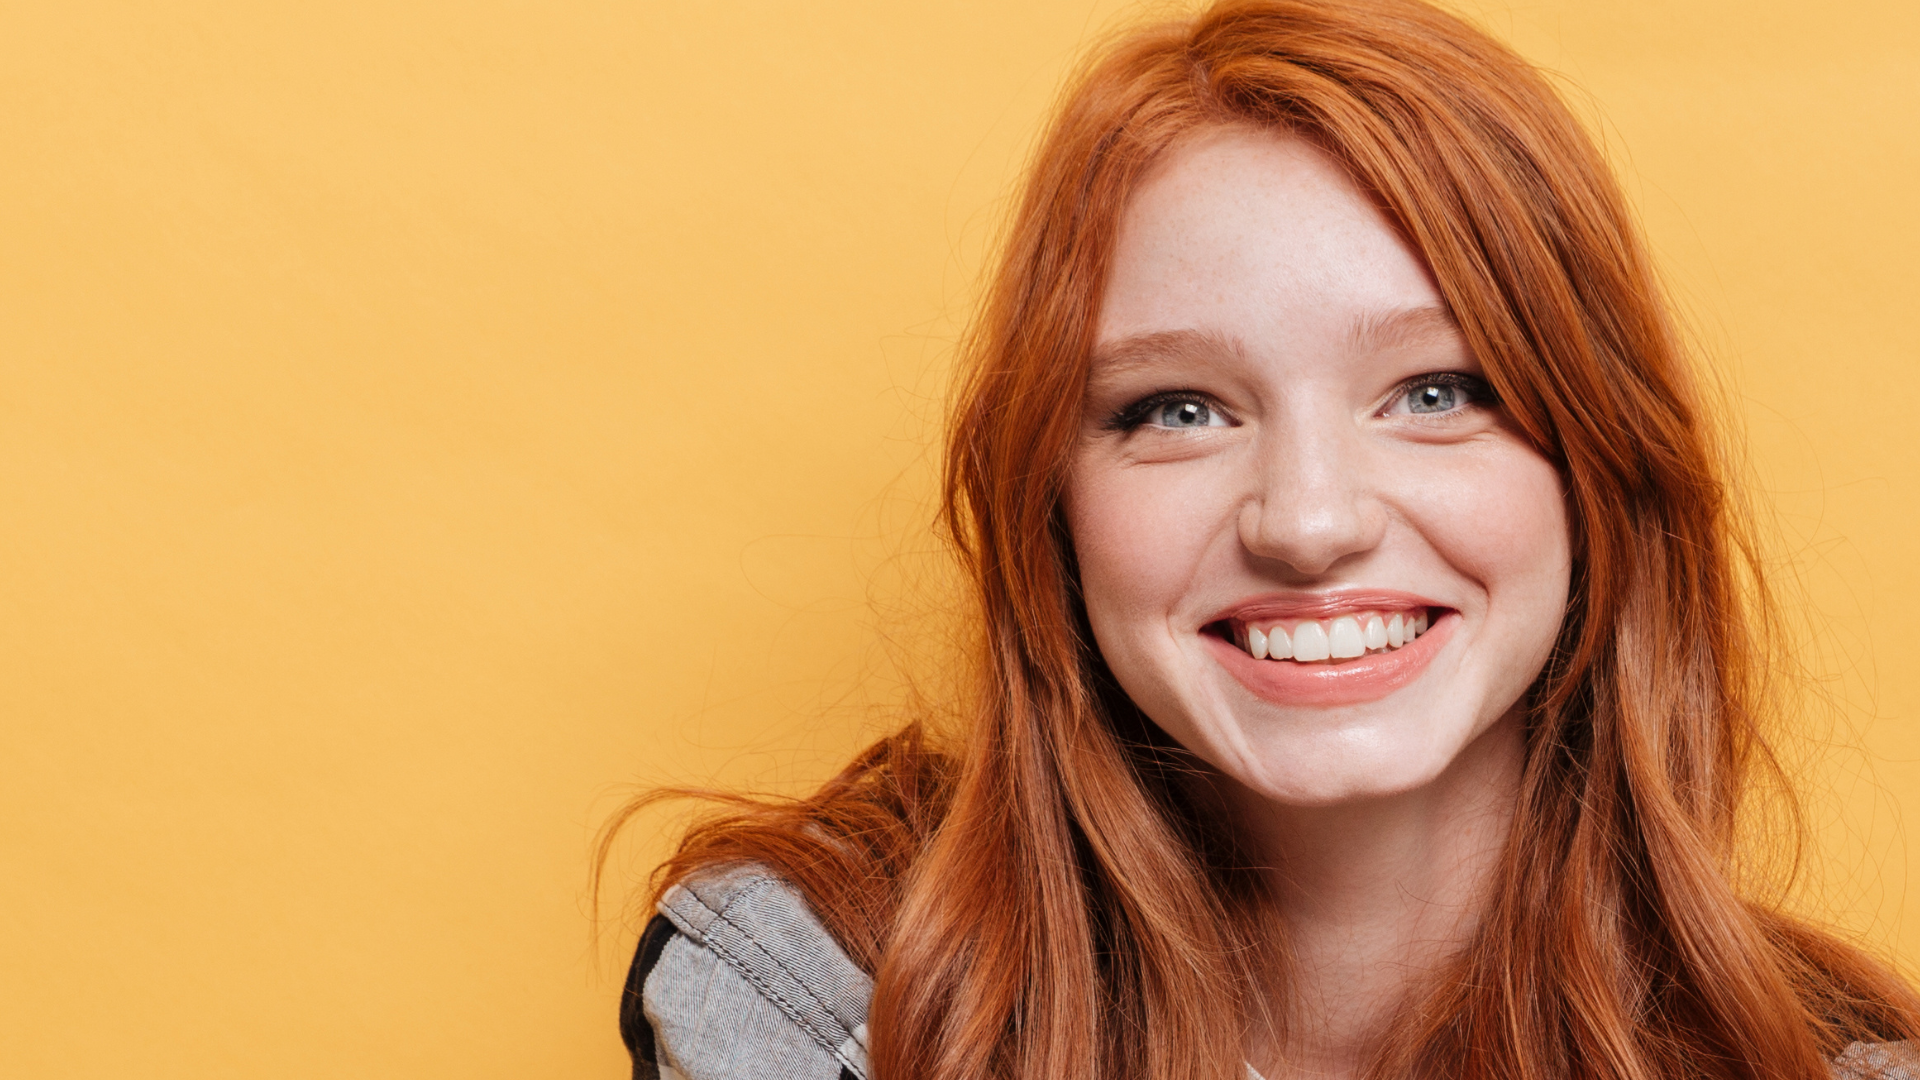 Where Did the Term “Strawberry Blonde” Come From?